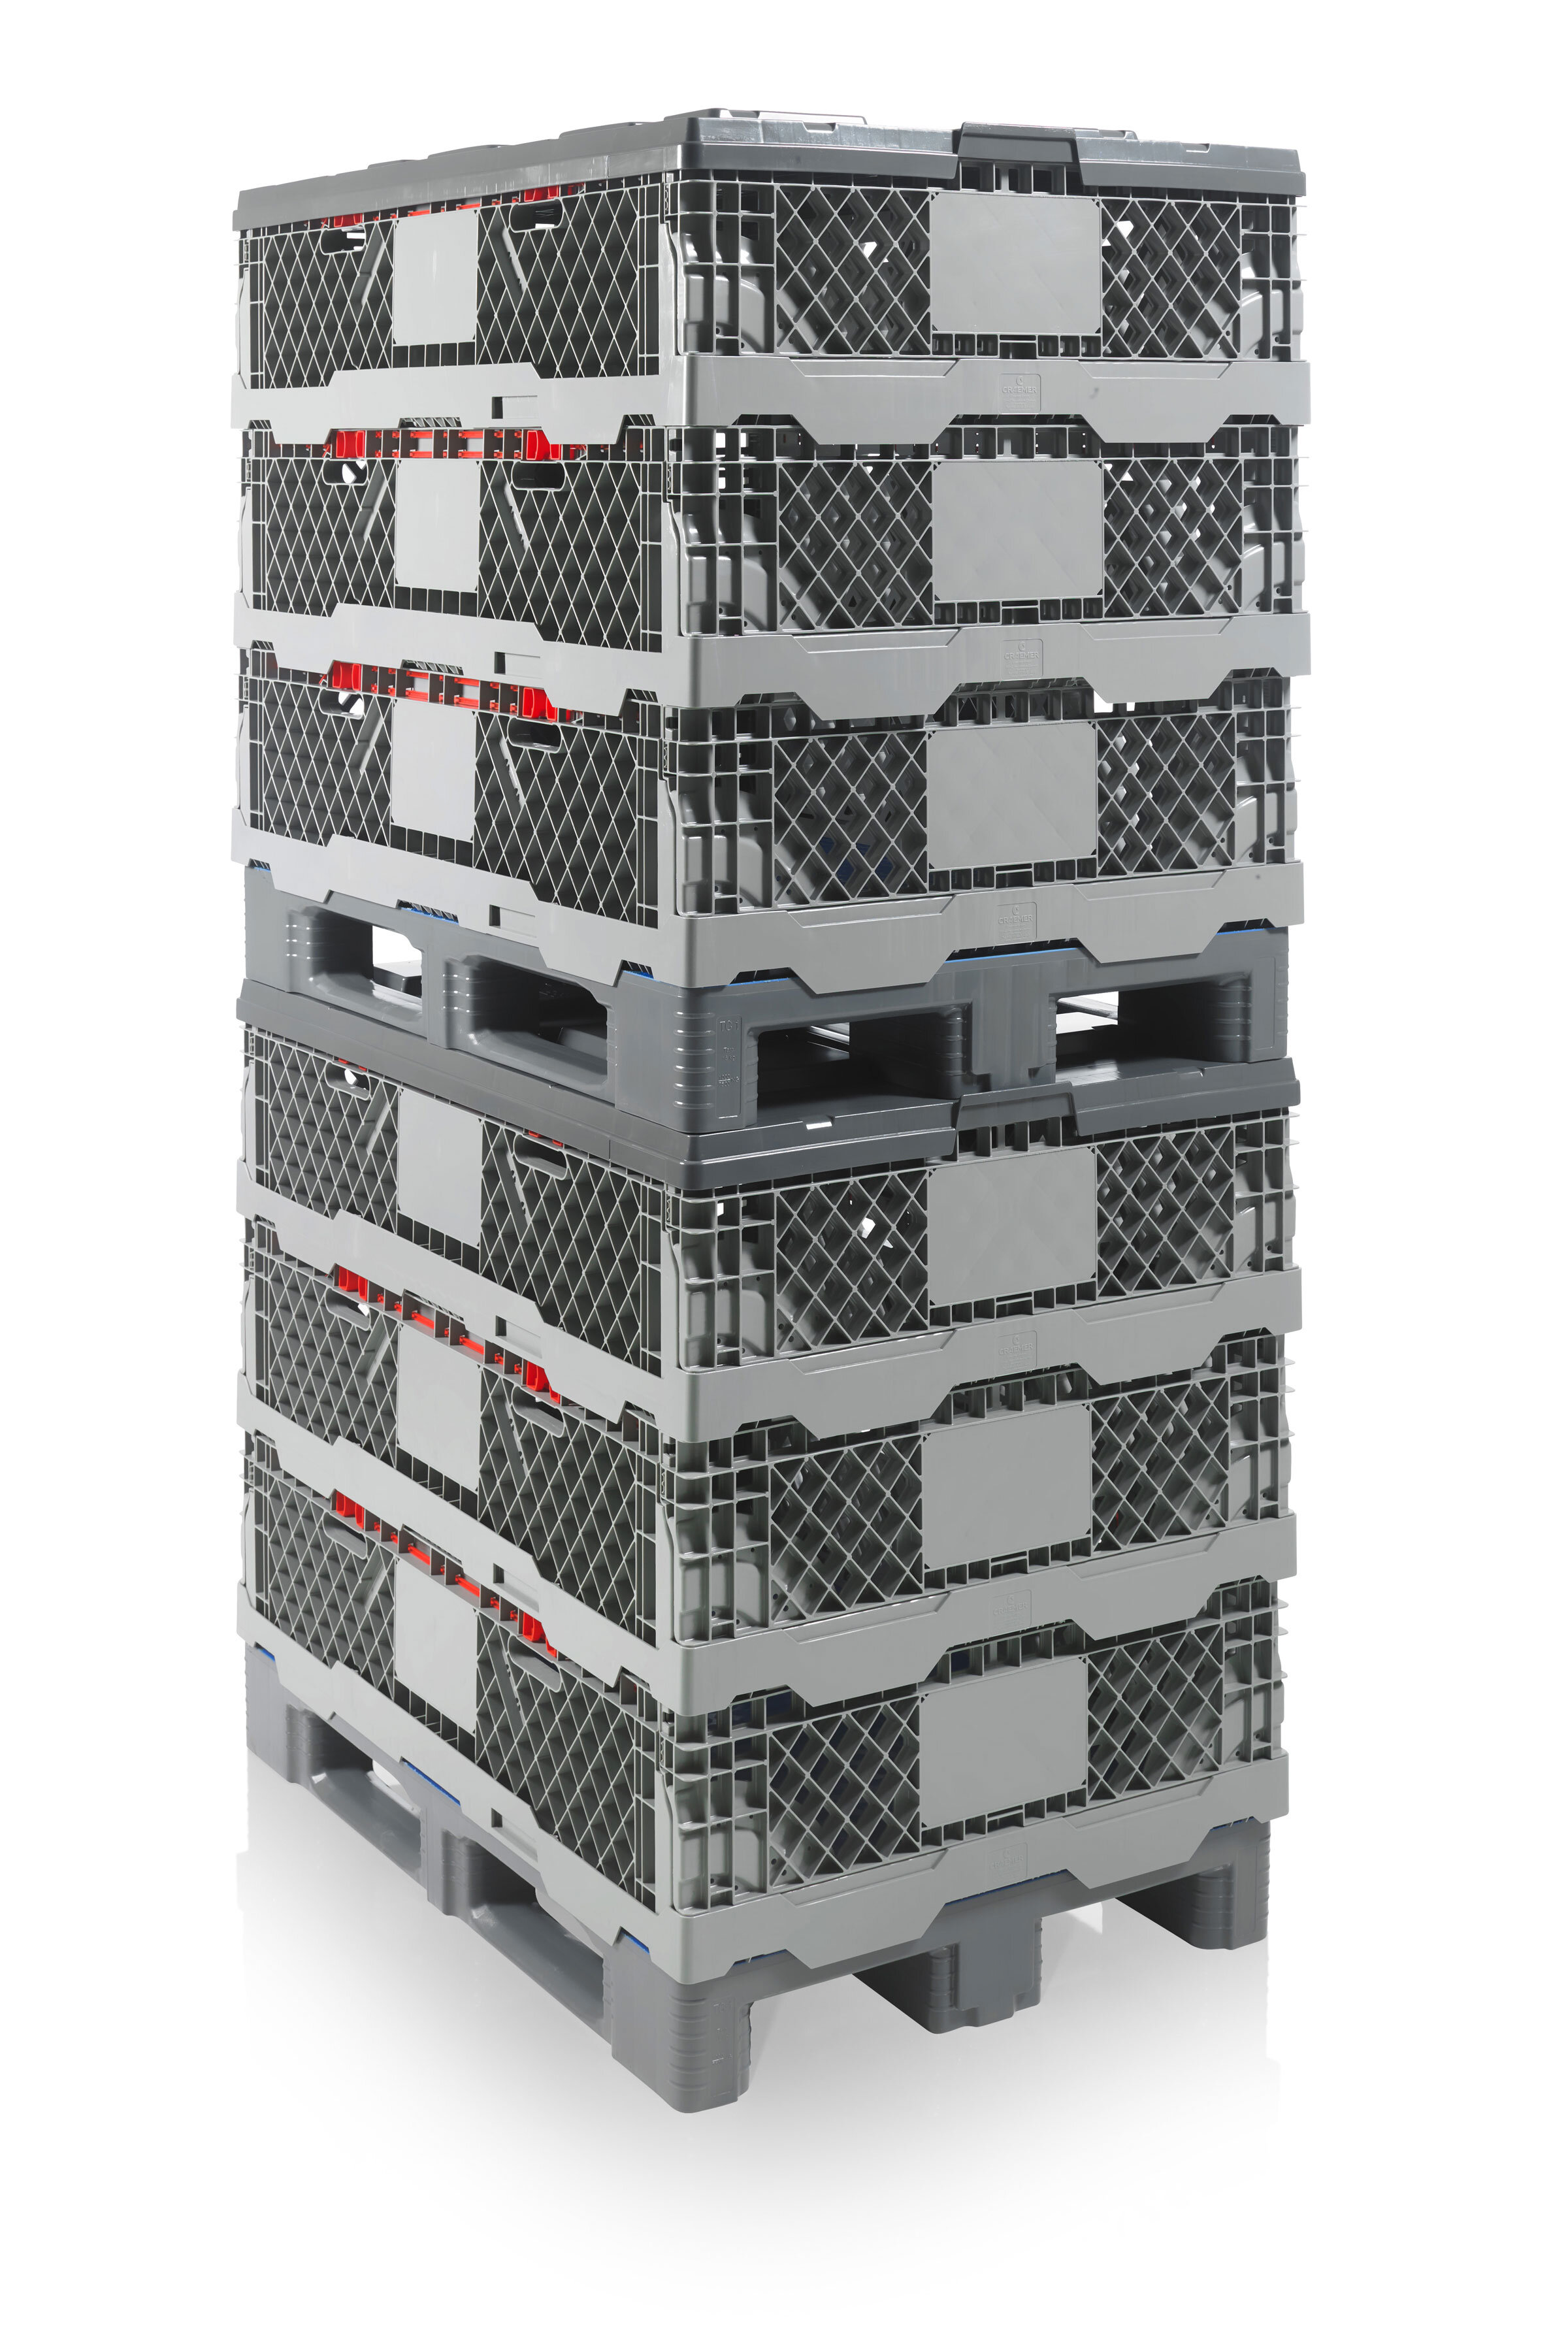 Added Value For Logistics: The Euro Pallet Frame CC1 From Craemer